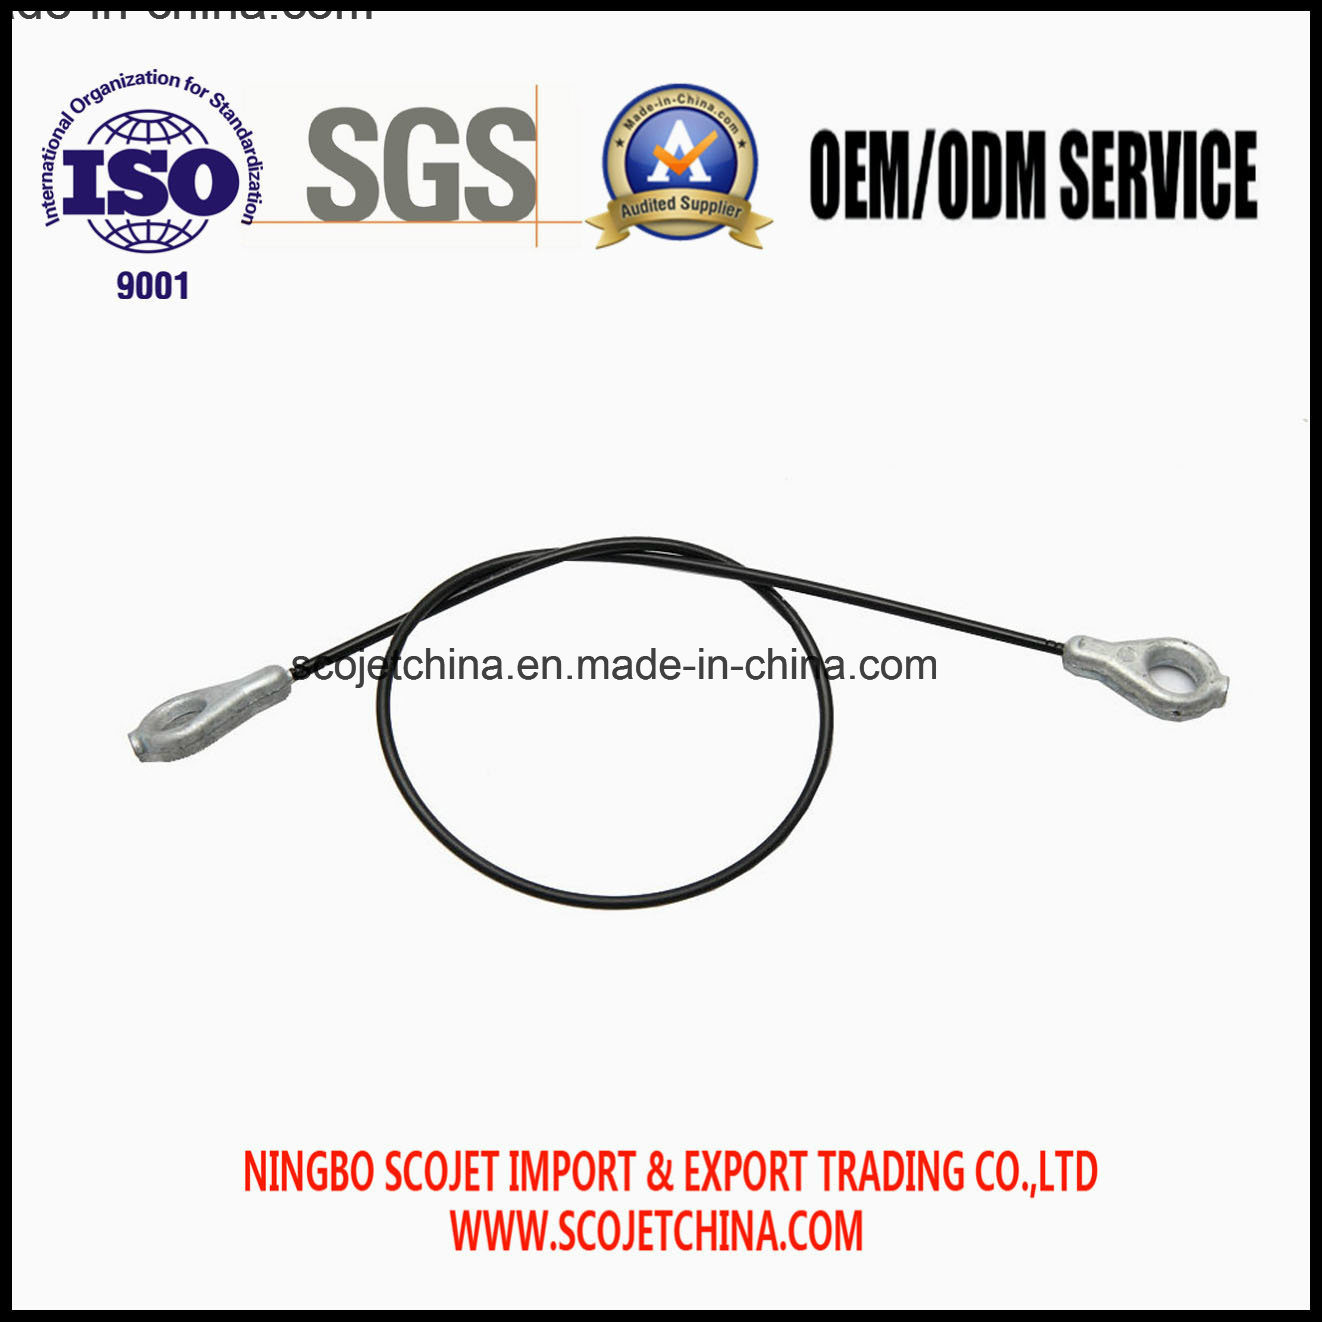 Control/Brake Cable for Garden Trimmer